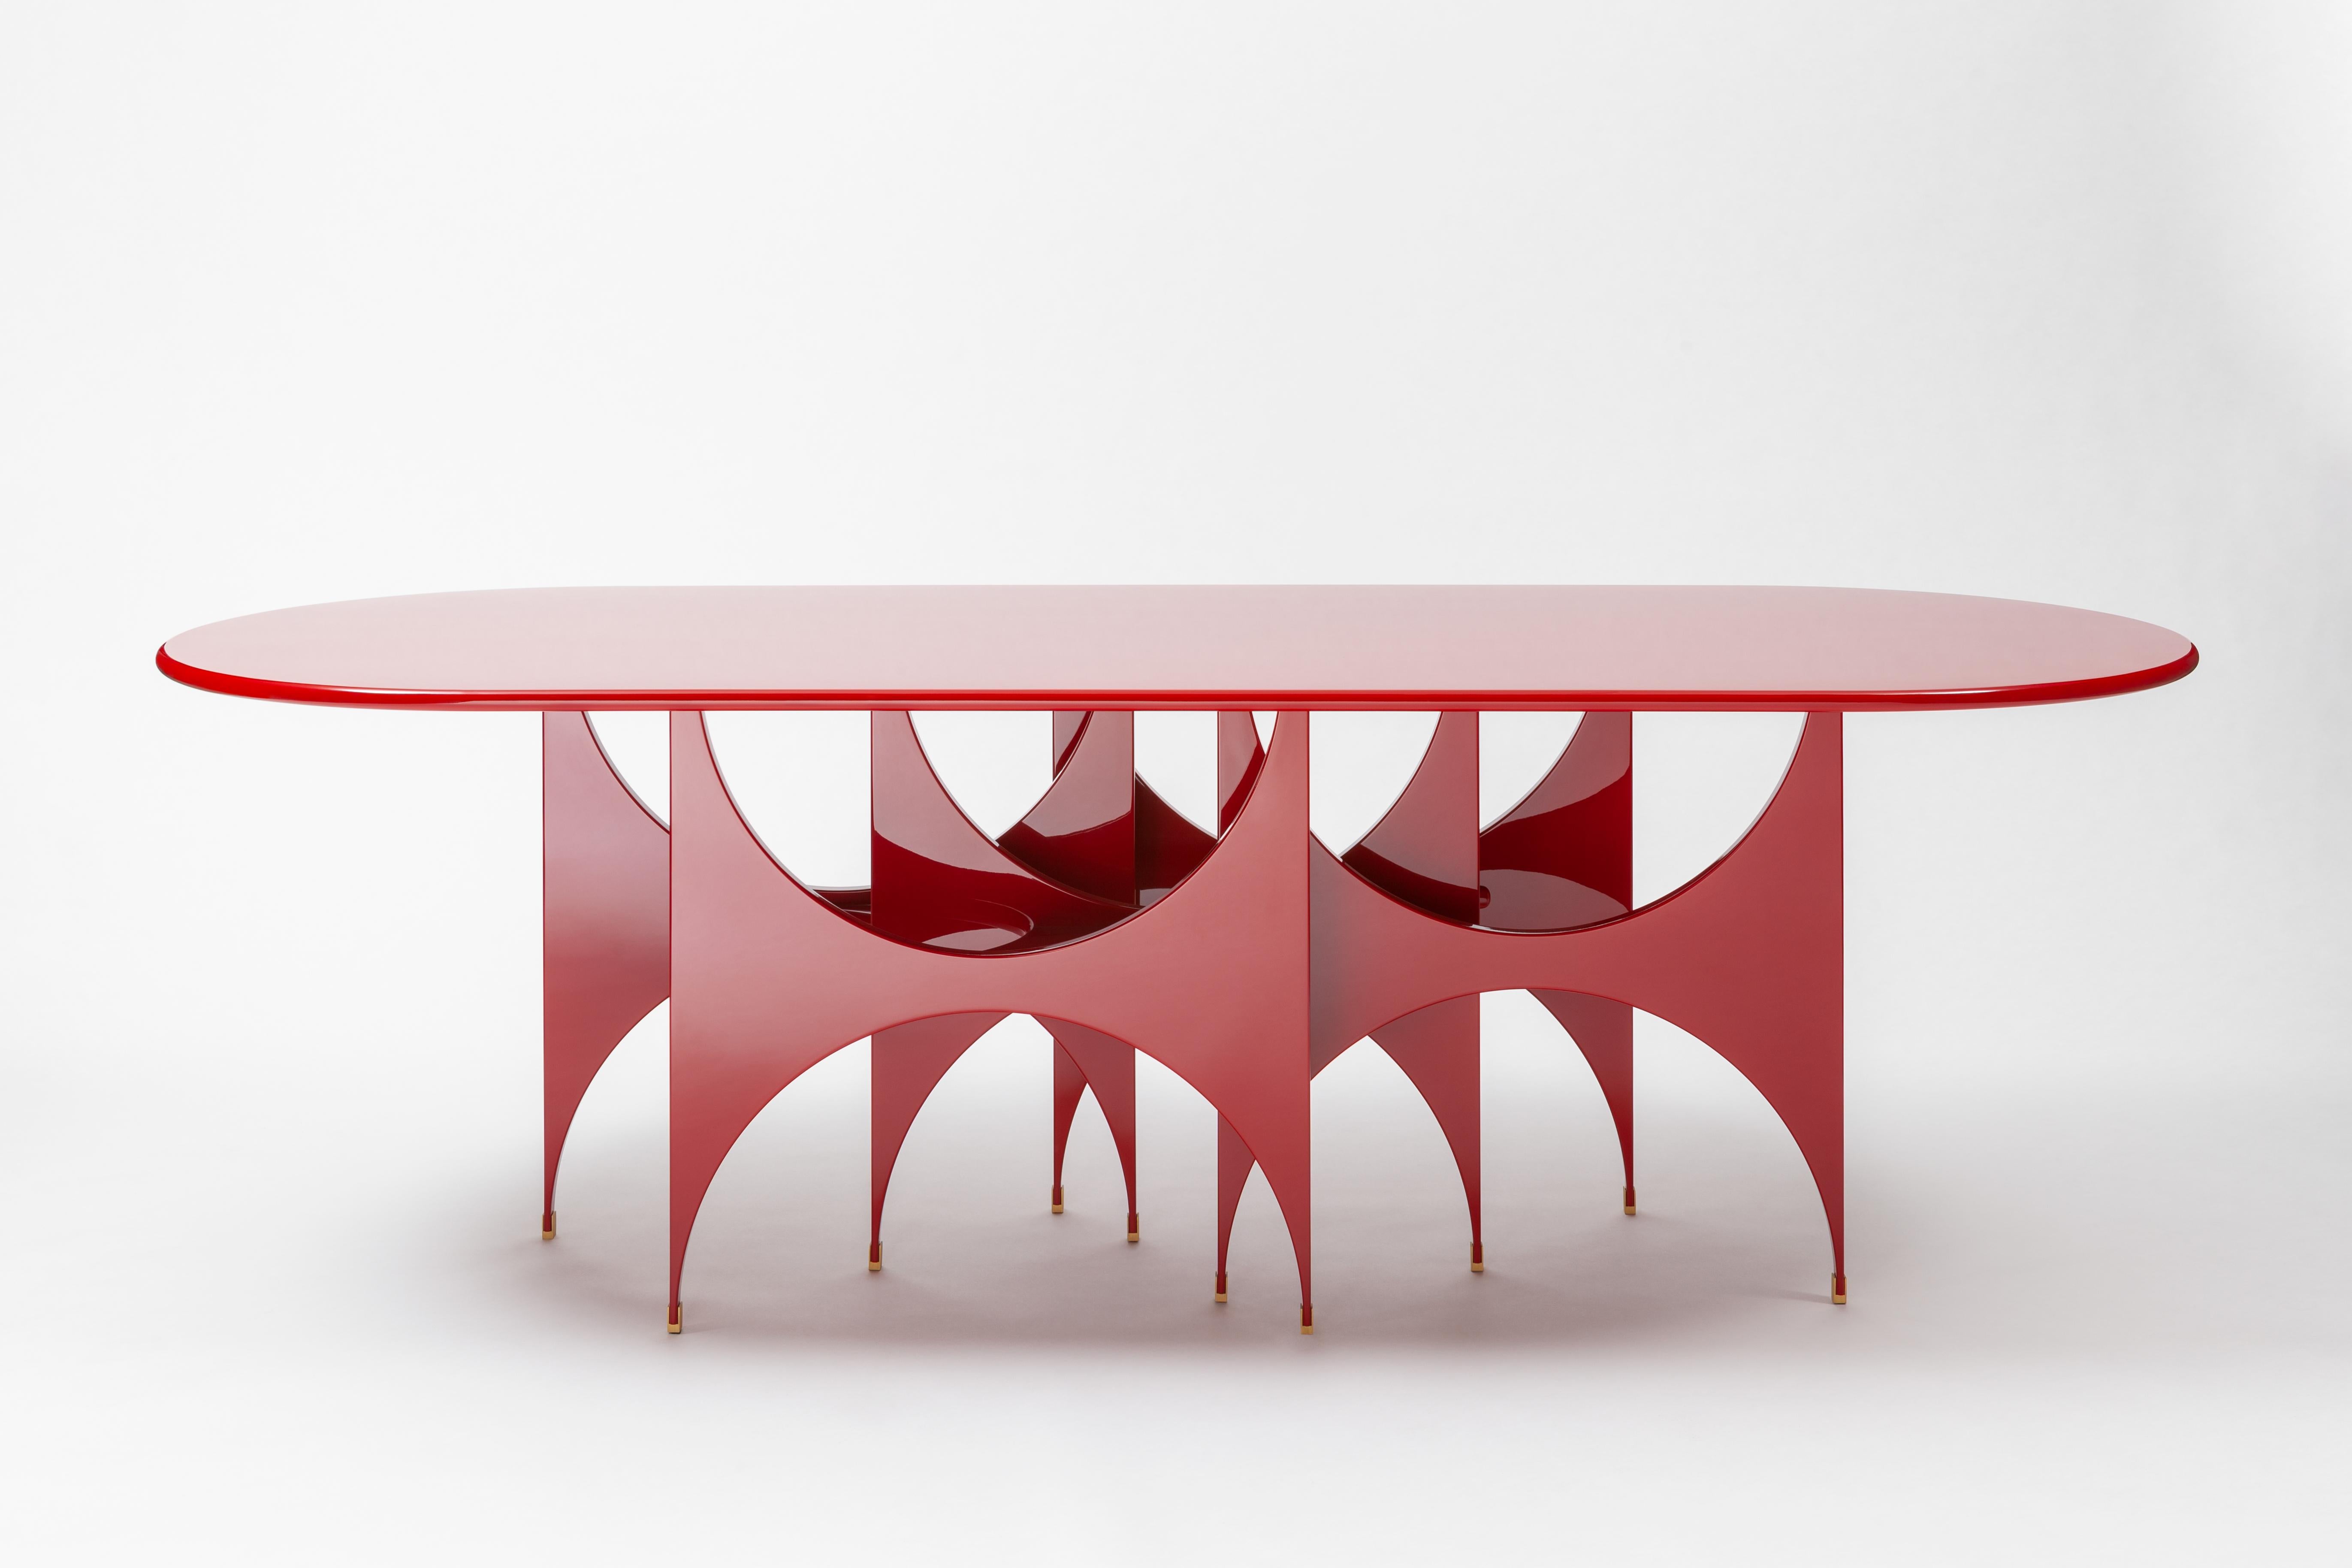 Butterfly oblong table by SEM
Dimensions: D250 x W110 x H78.5 cm
Material: polyester glossy lacquered finish.
Costumized sizes, colors and top available on request. Also available in Walnut. Top Available min: 220cm and max: 270cm.

The